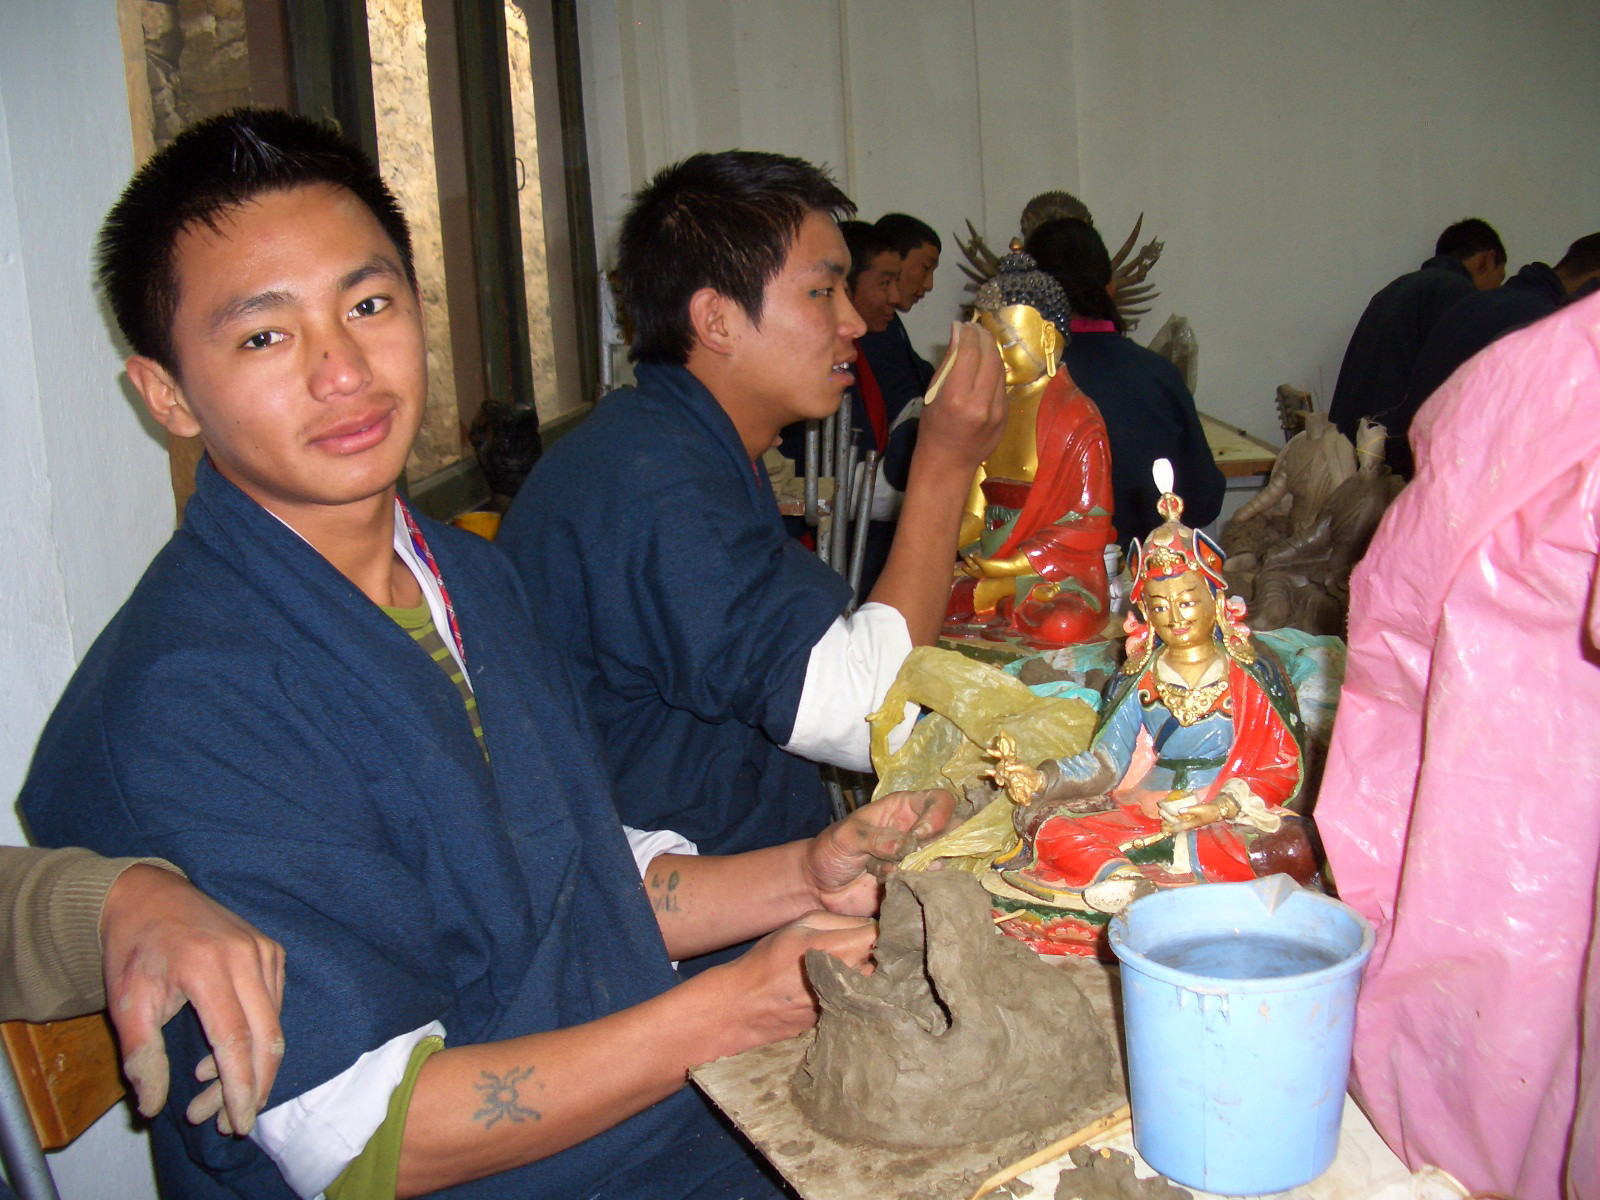 next, we visited the painting school, which offers 6-year courses offering instruction in Bhutan's traditional arts.